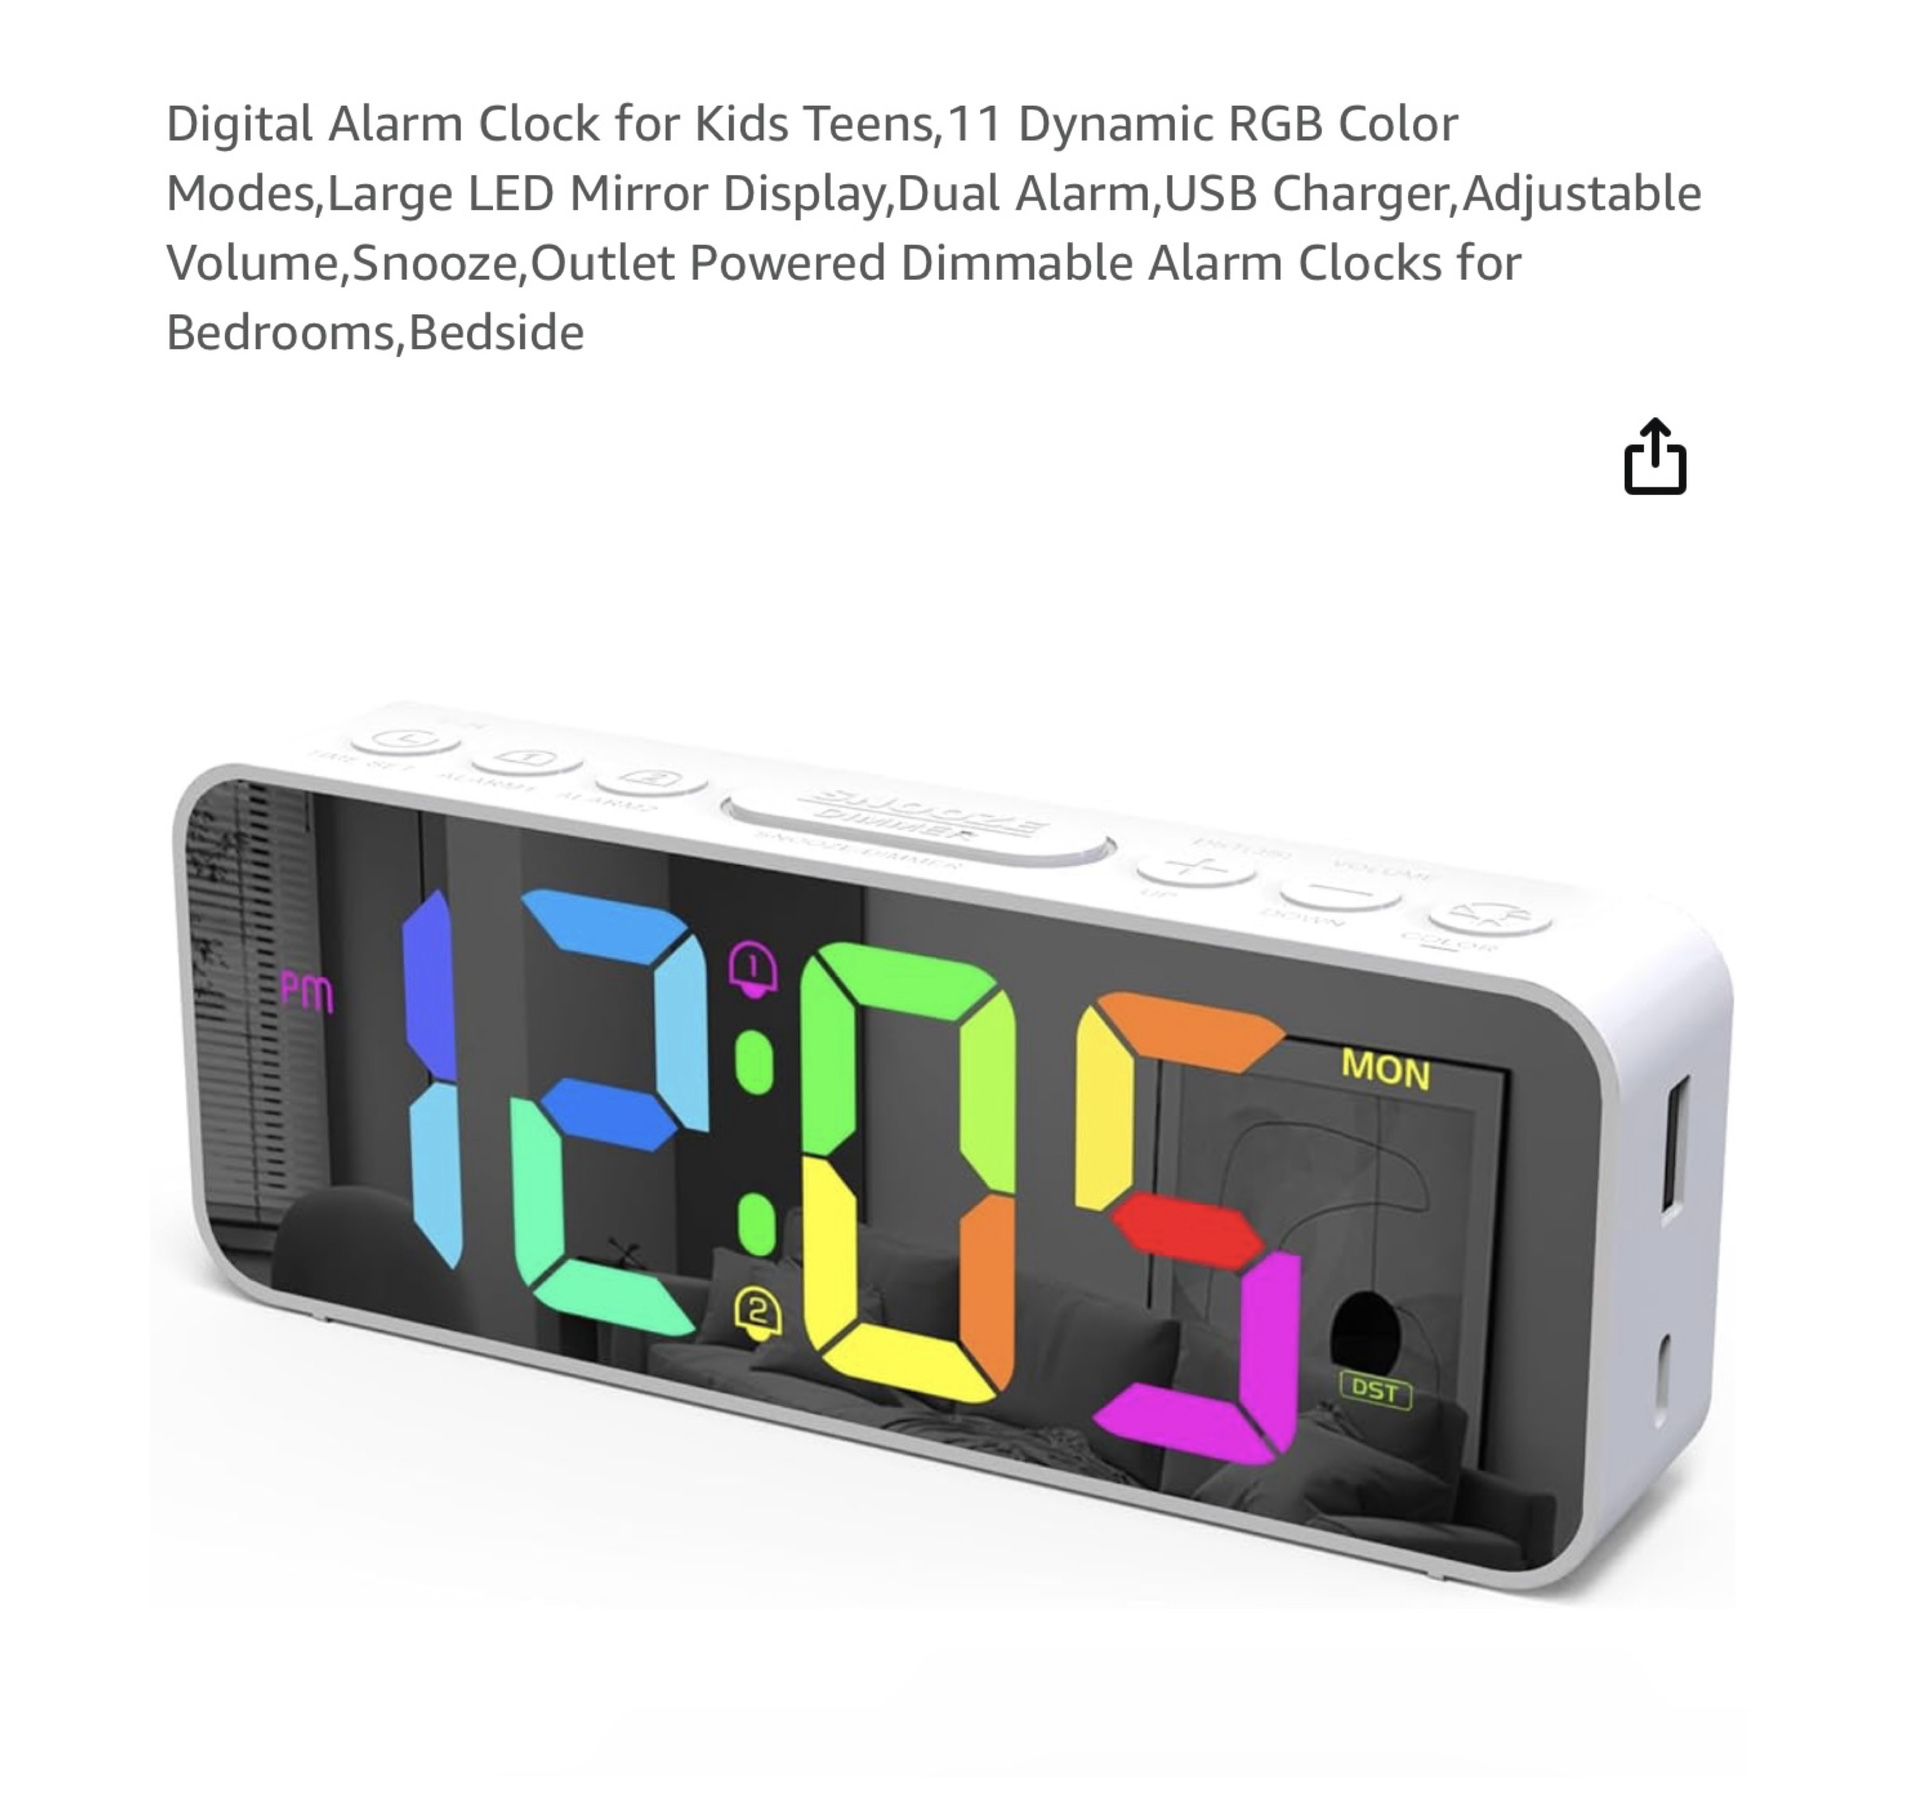 Brand new Digital Alarm Clock for Kids Teens,11 Dynamic RGB Color Modes,Large LED Mirror Display,Dual Alarm,USB Charger,Adjustable Volume,Snooze,Outle